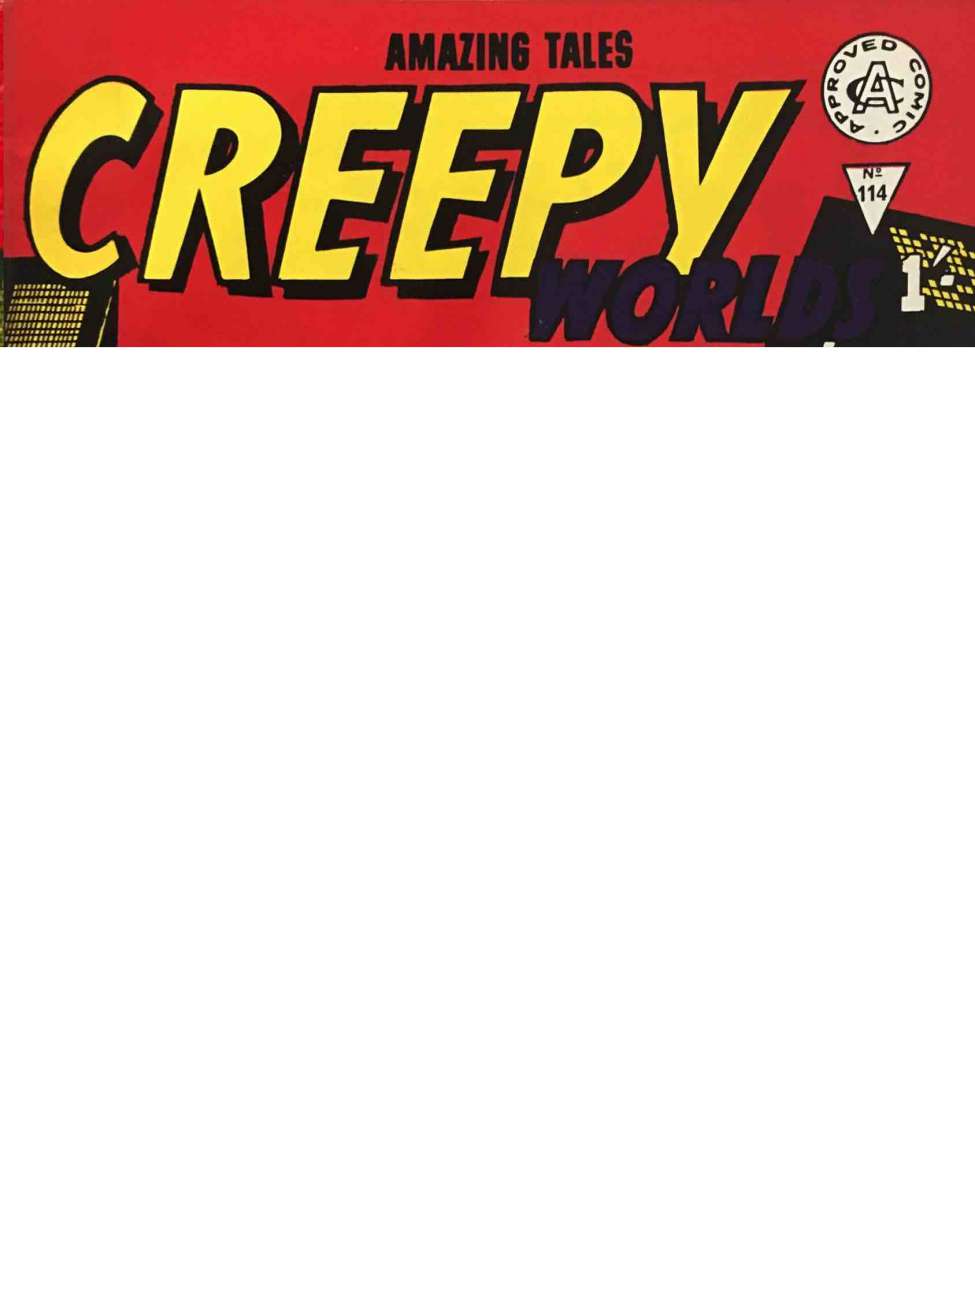 Book Cover For Creepy Worlds 114